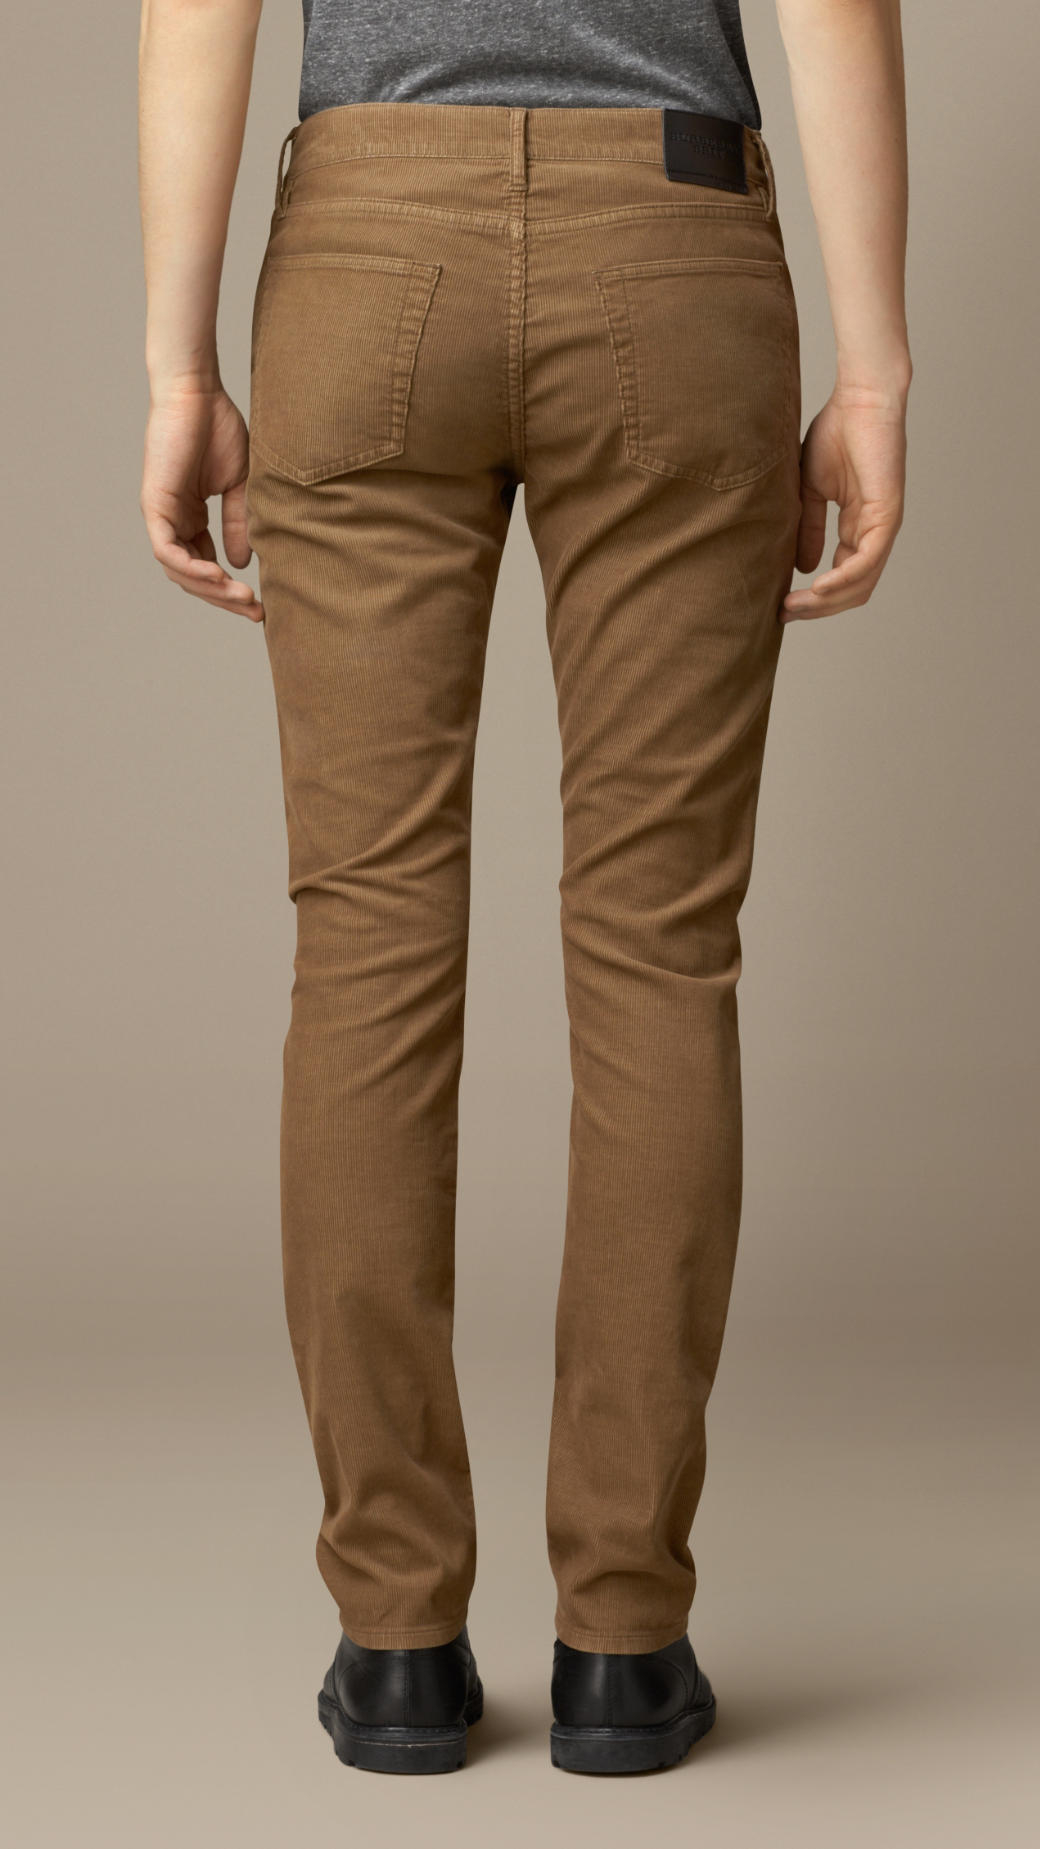 Burberry Slim Fit Corduroy Trousers in Sand Brown (Brown) for Men - Lyst